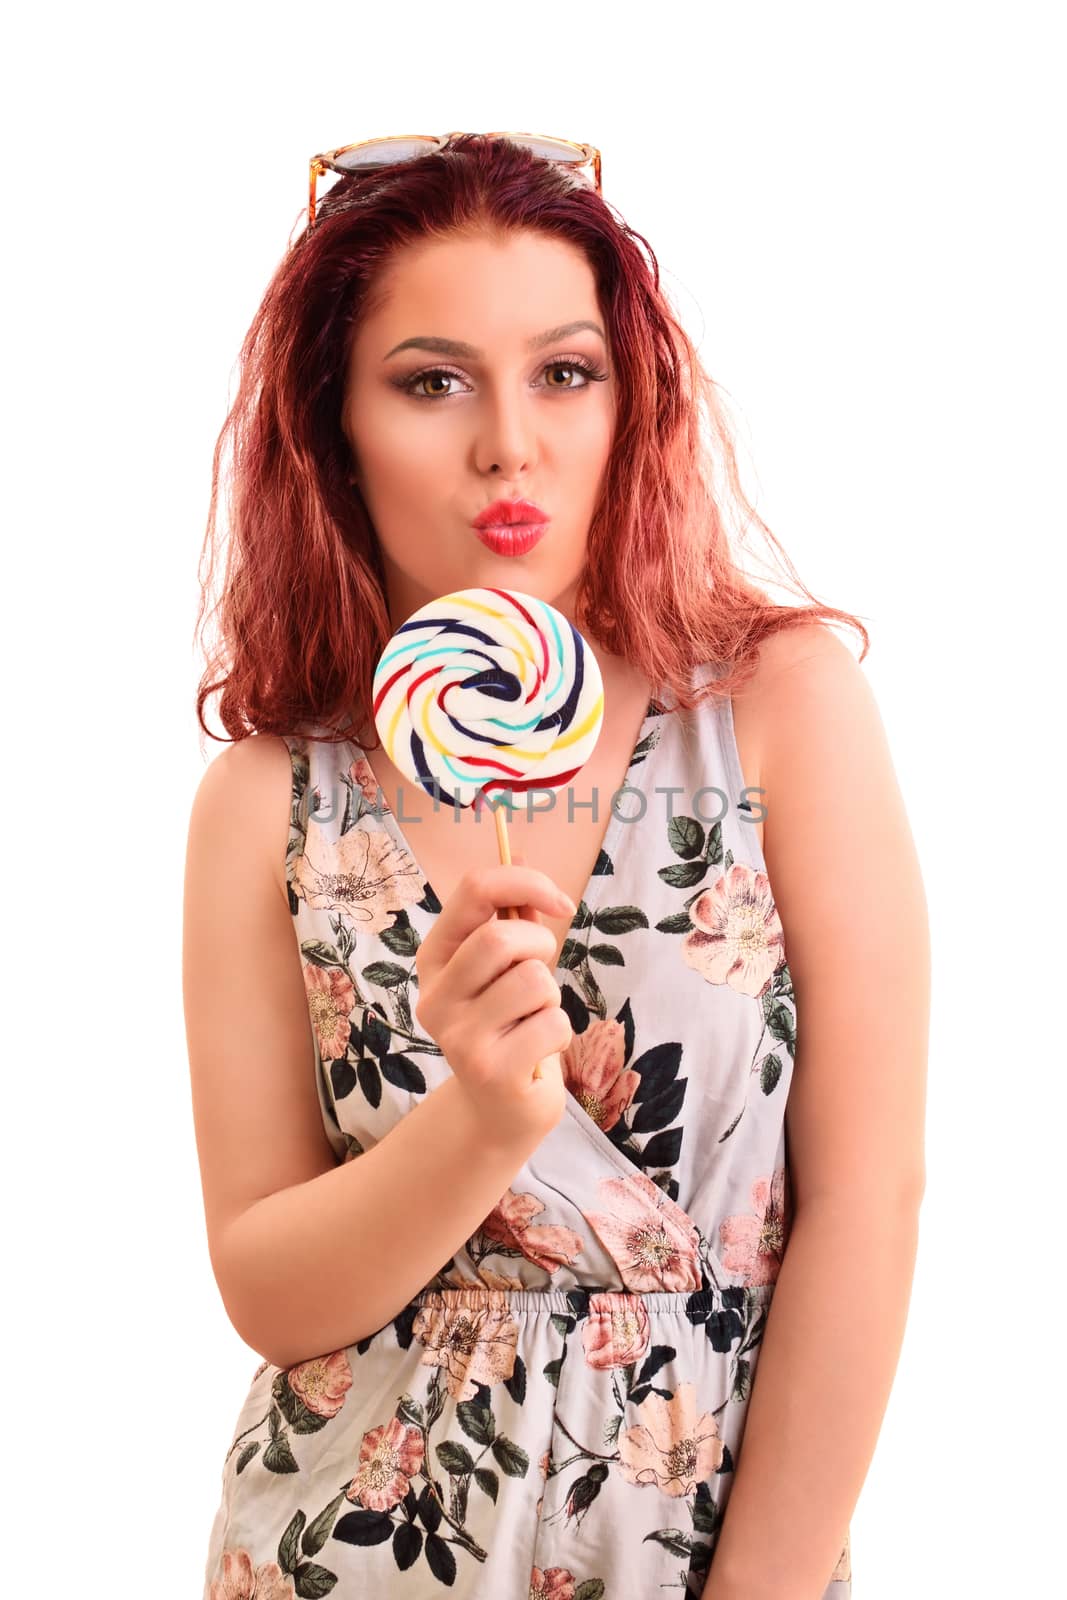 Beautiful young girl holding a lollipop by Mendelex